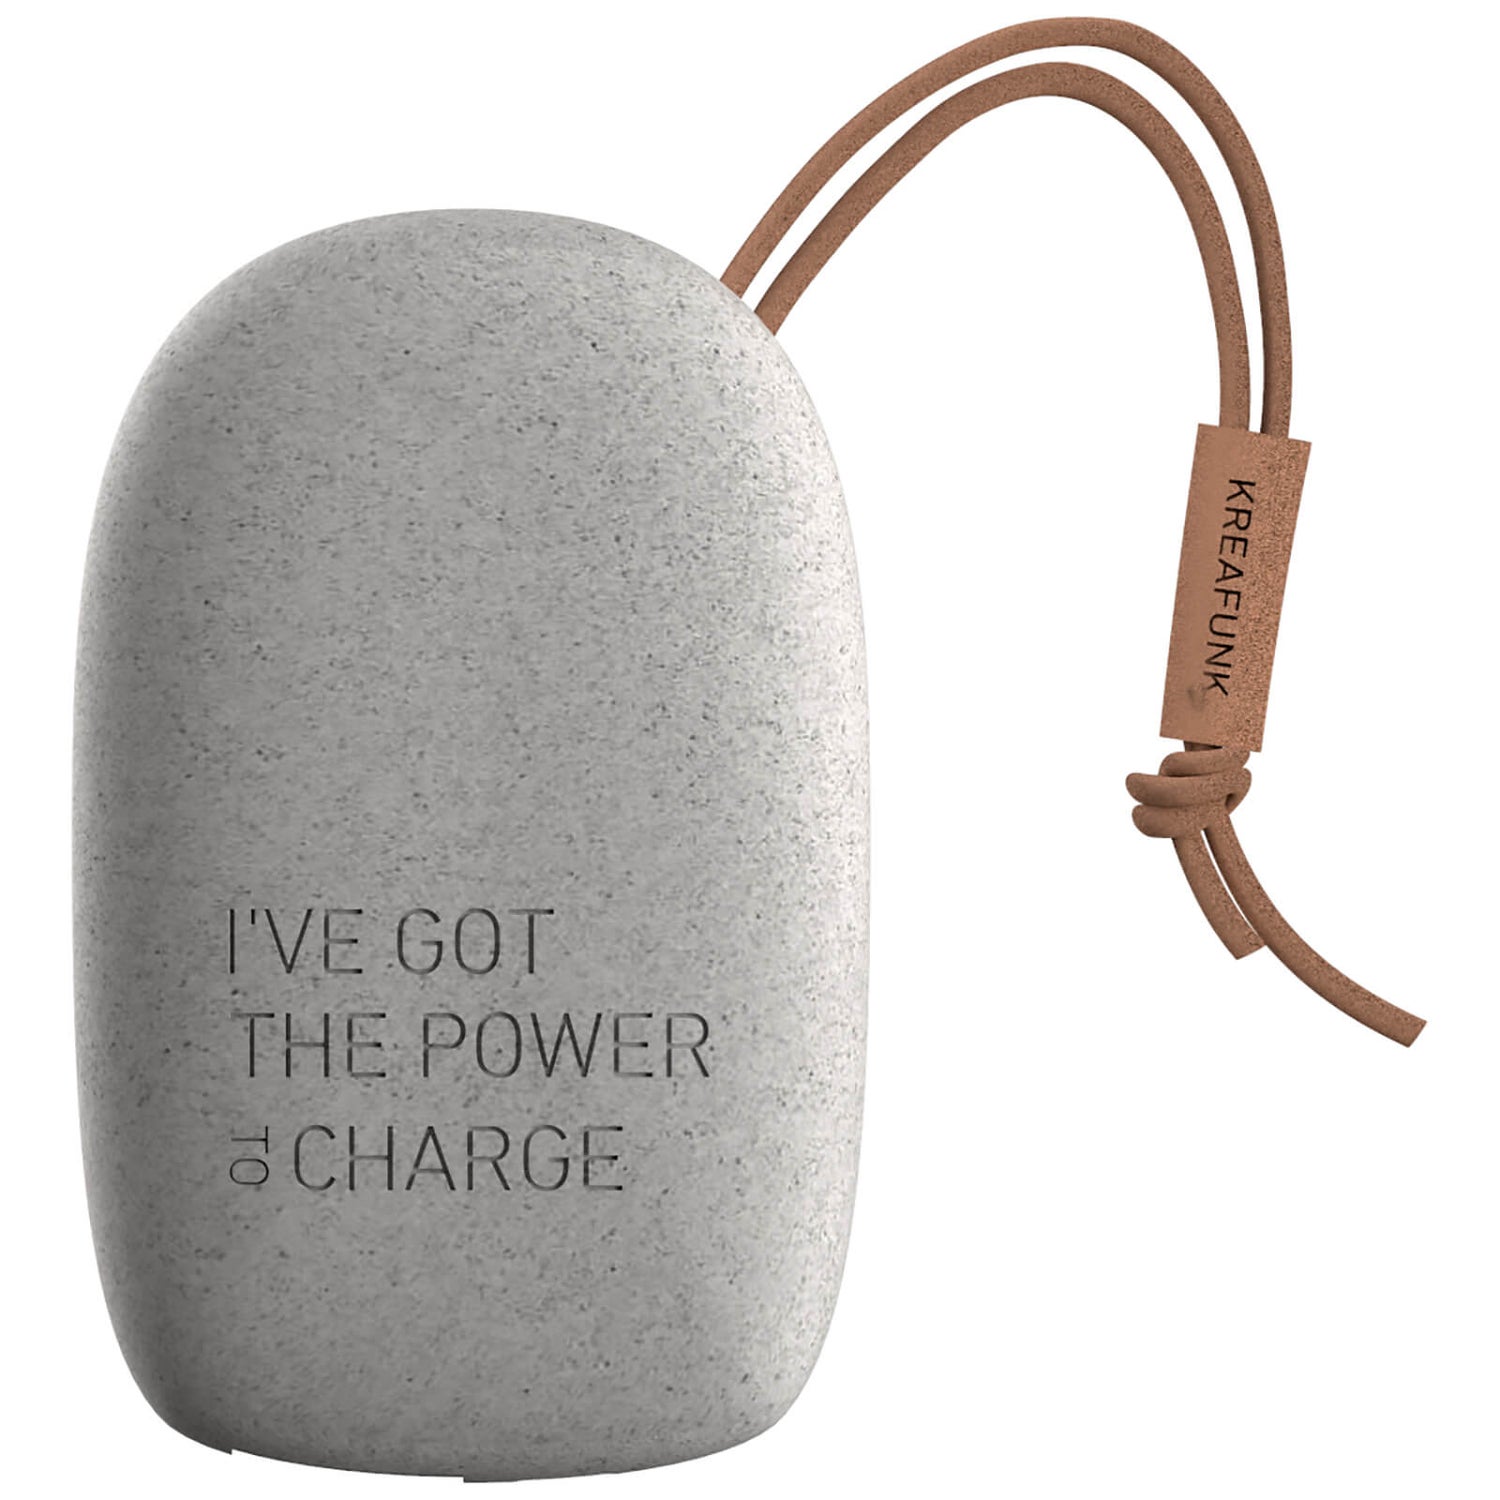 Kreafunk toCHARGE Power Bank - Care Collection